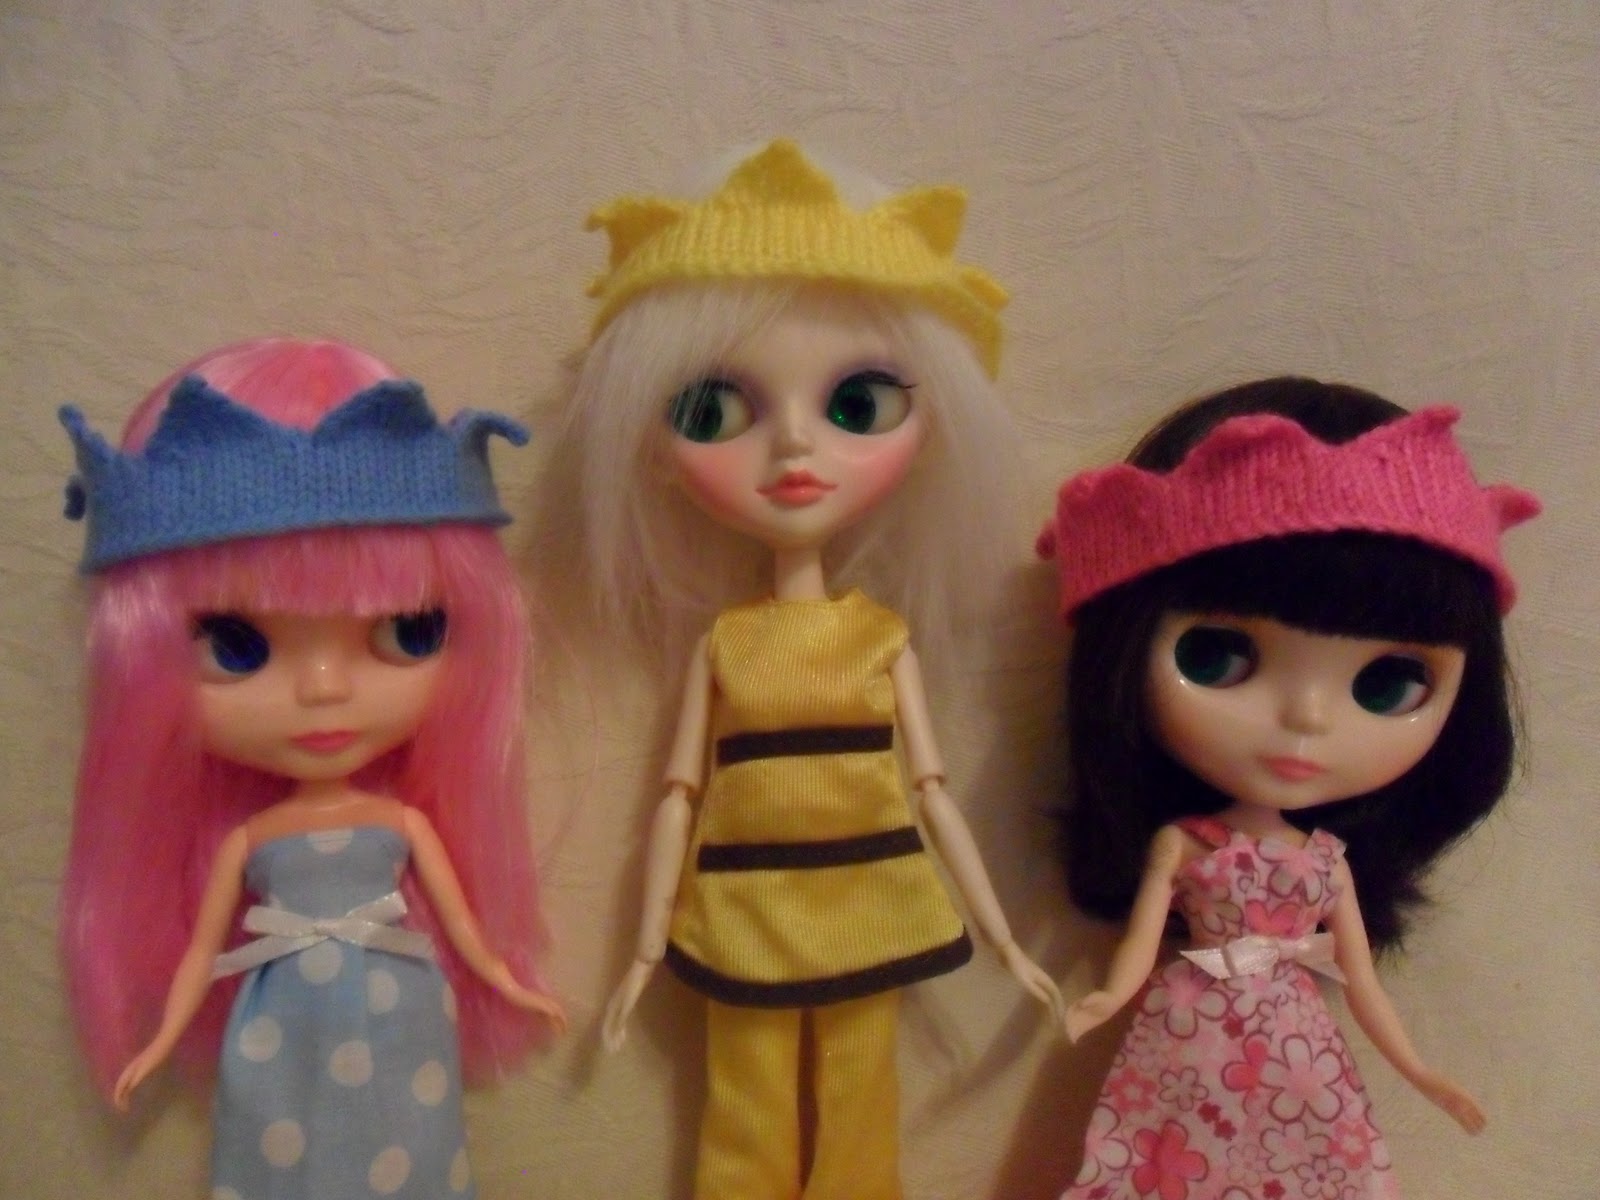 I hope you like the pattern and I hope it enhances some other Blythe doll parties 0P